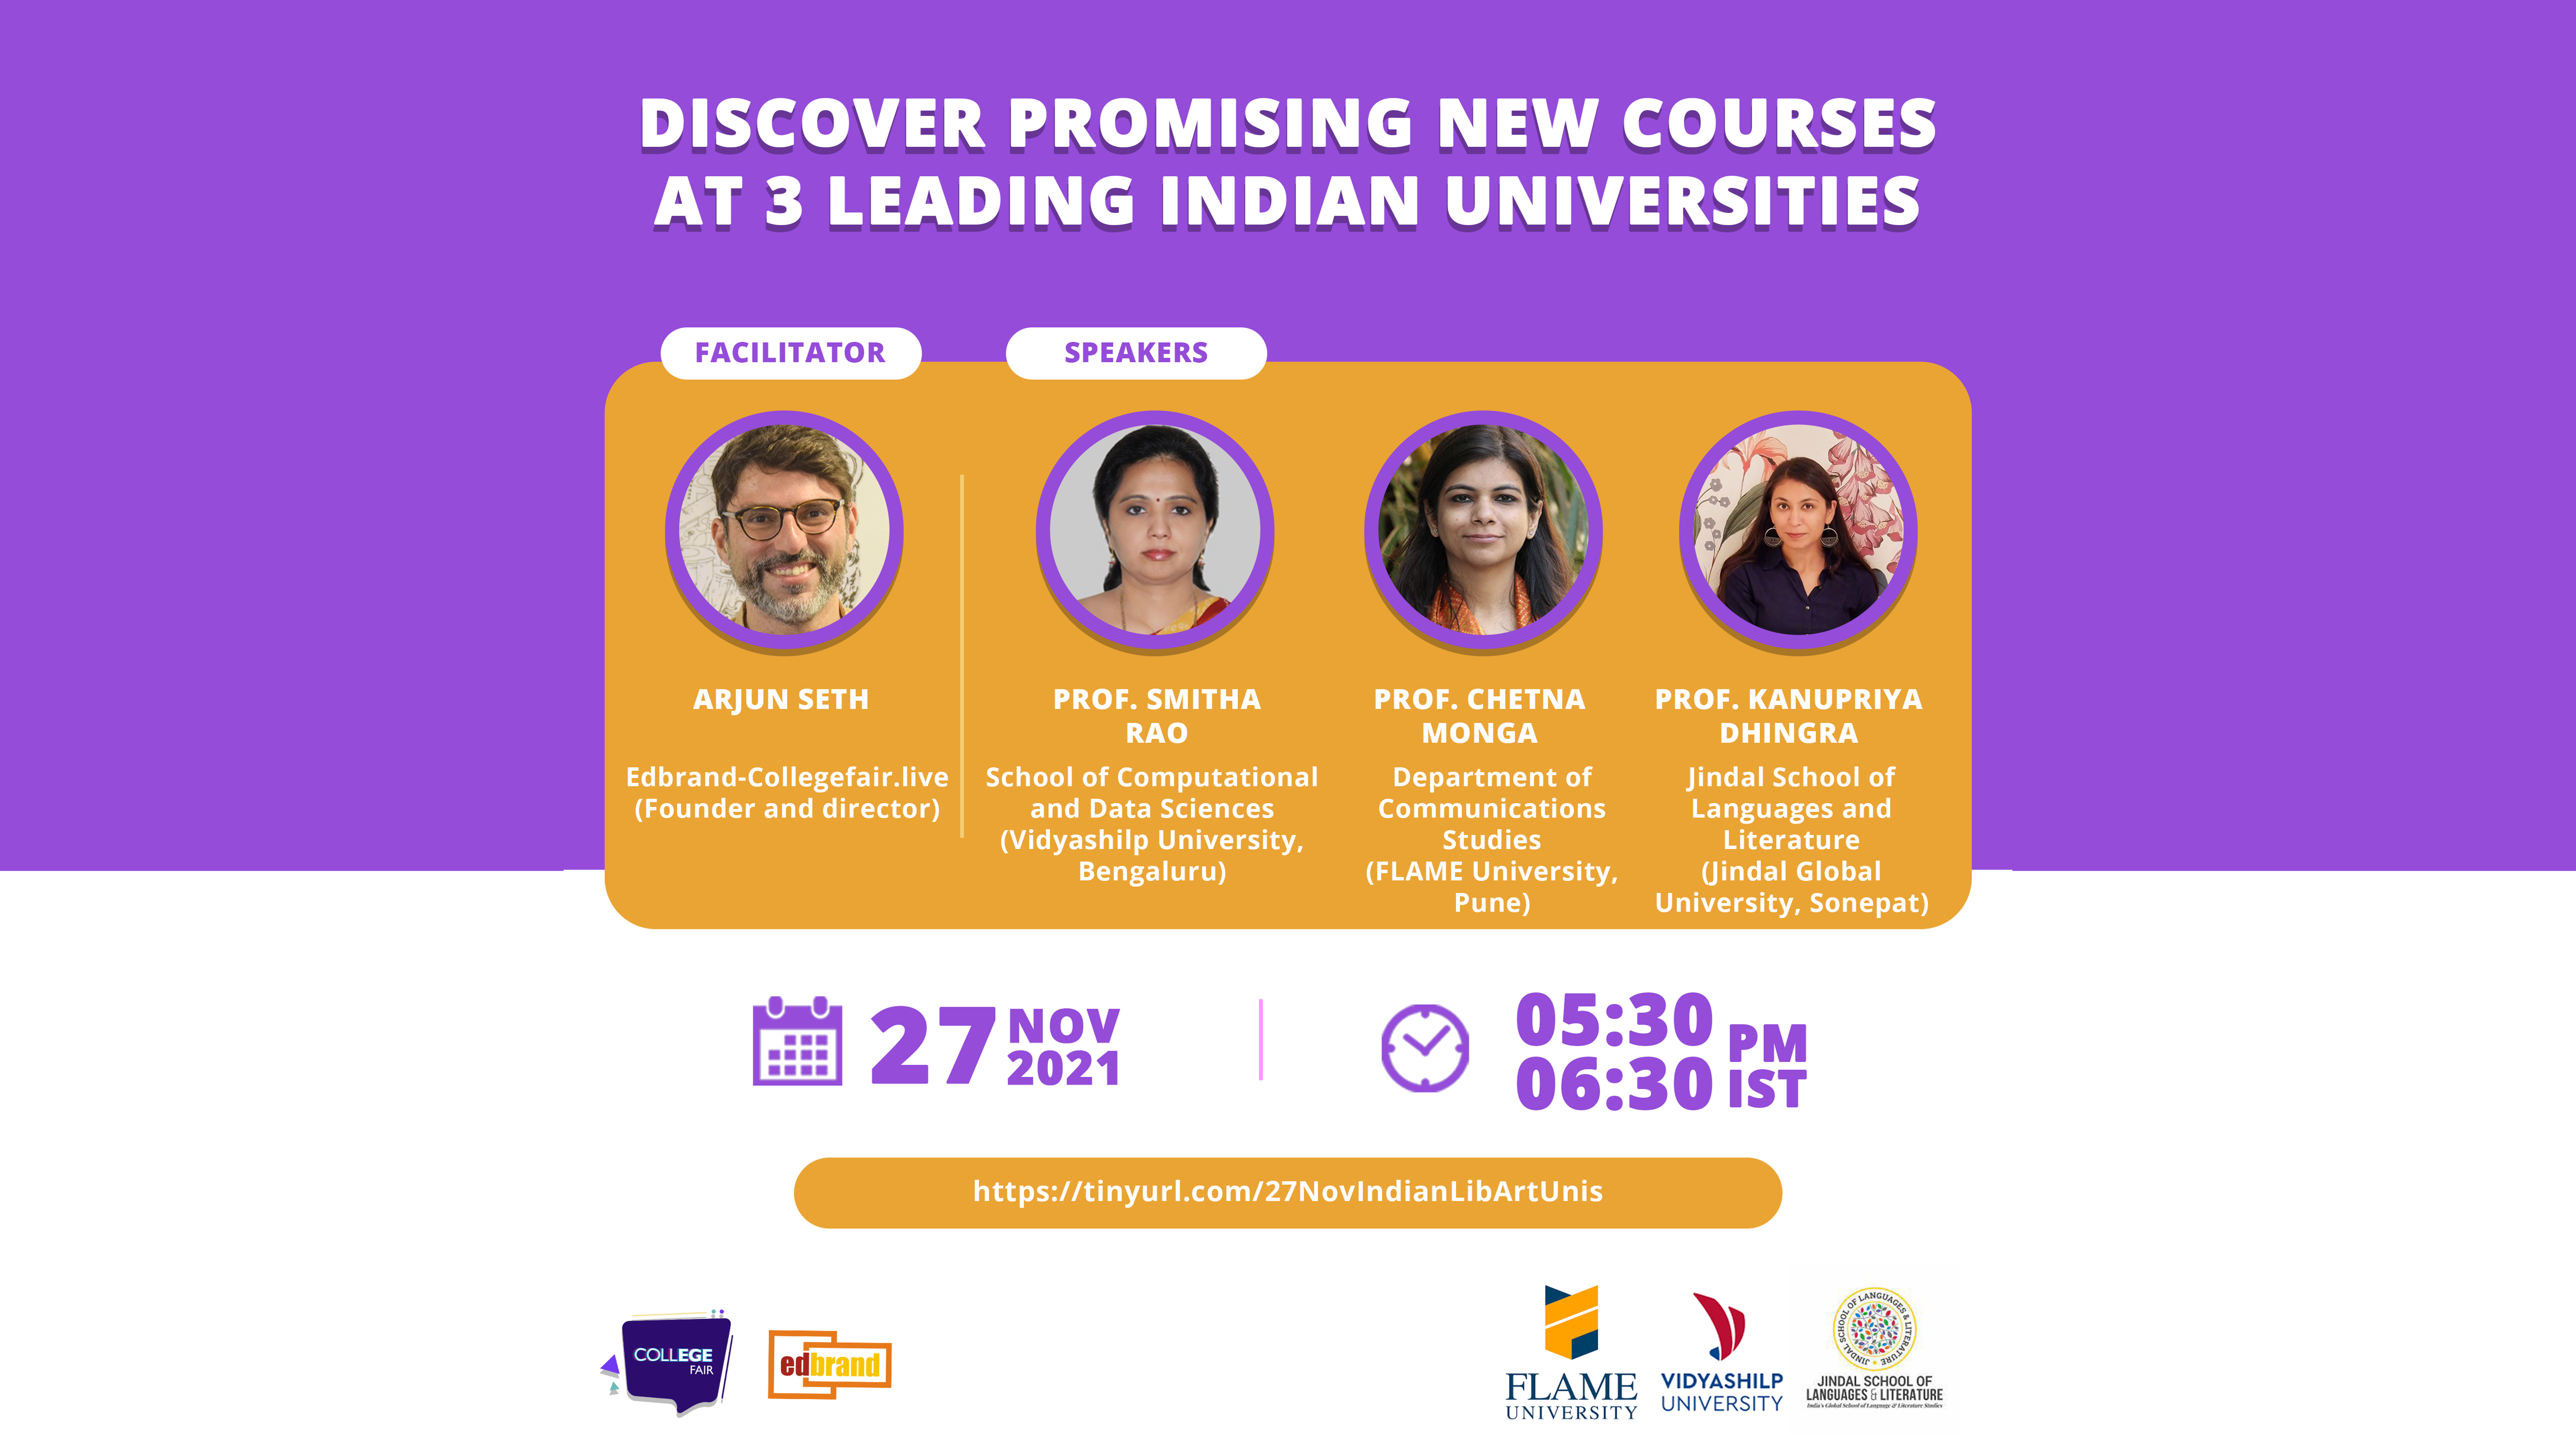 Discover Promising New Courses in 3 Leading Indian Universities: Vidyashilp University